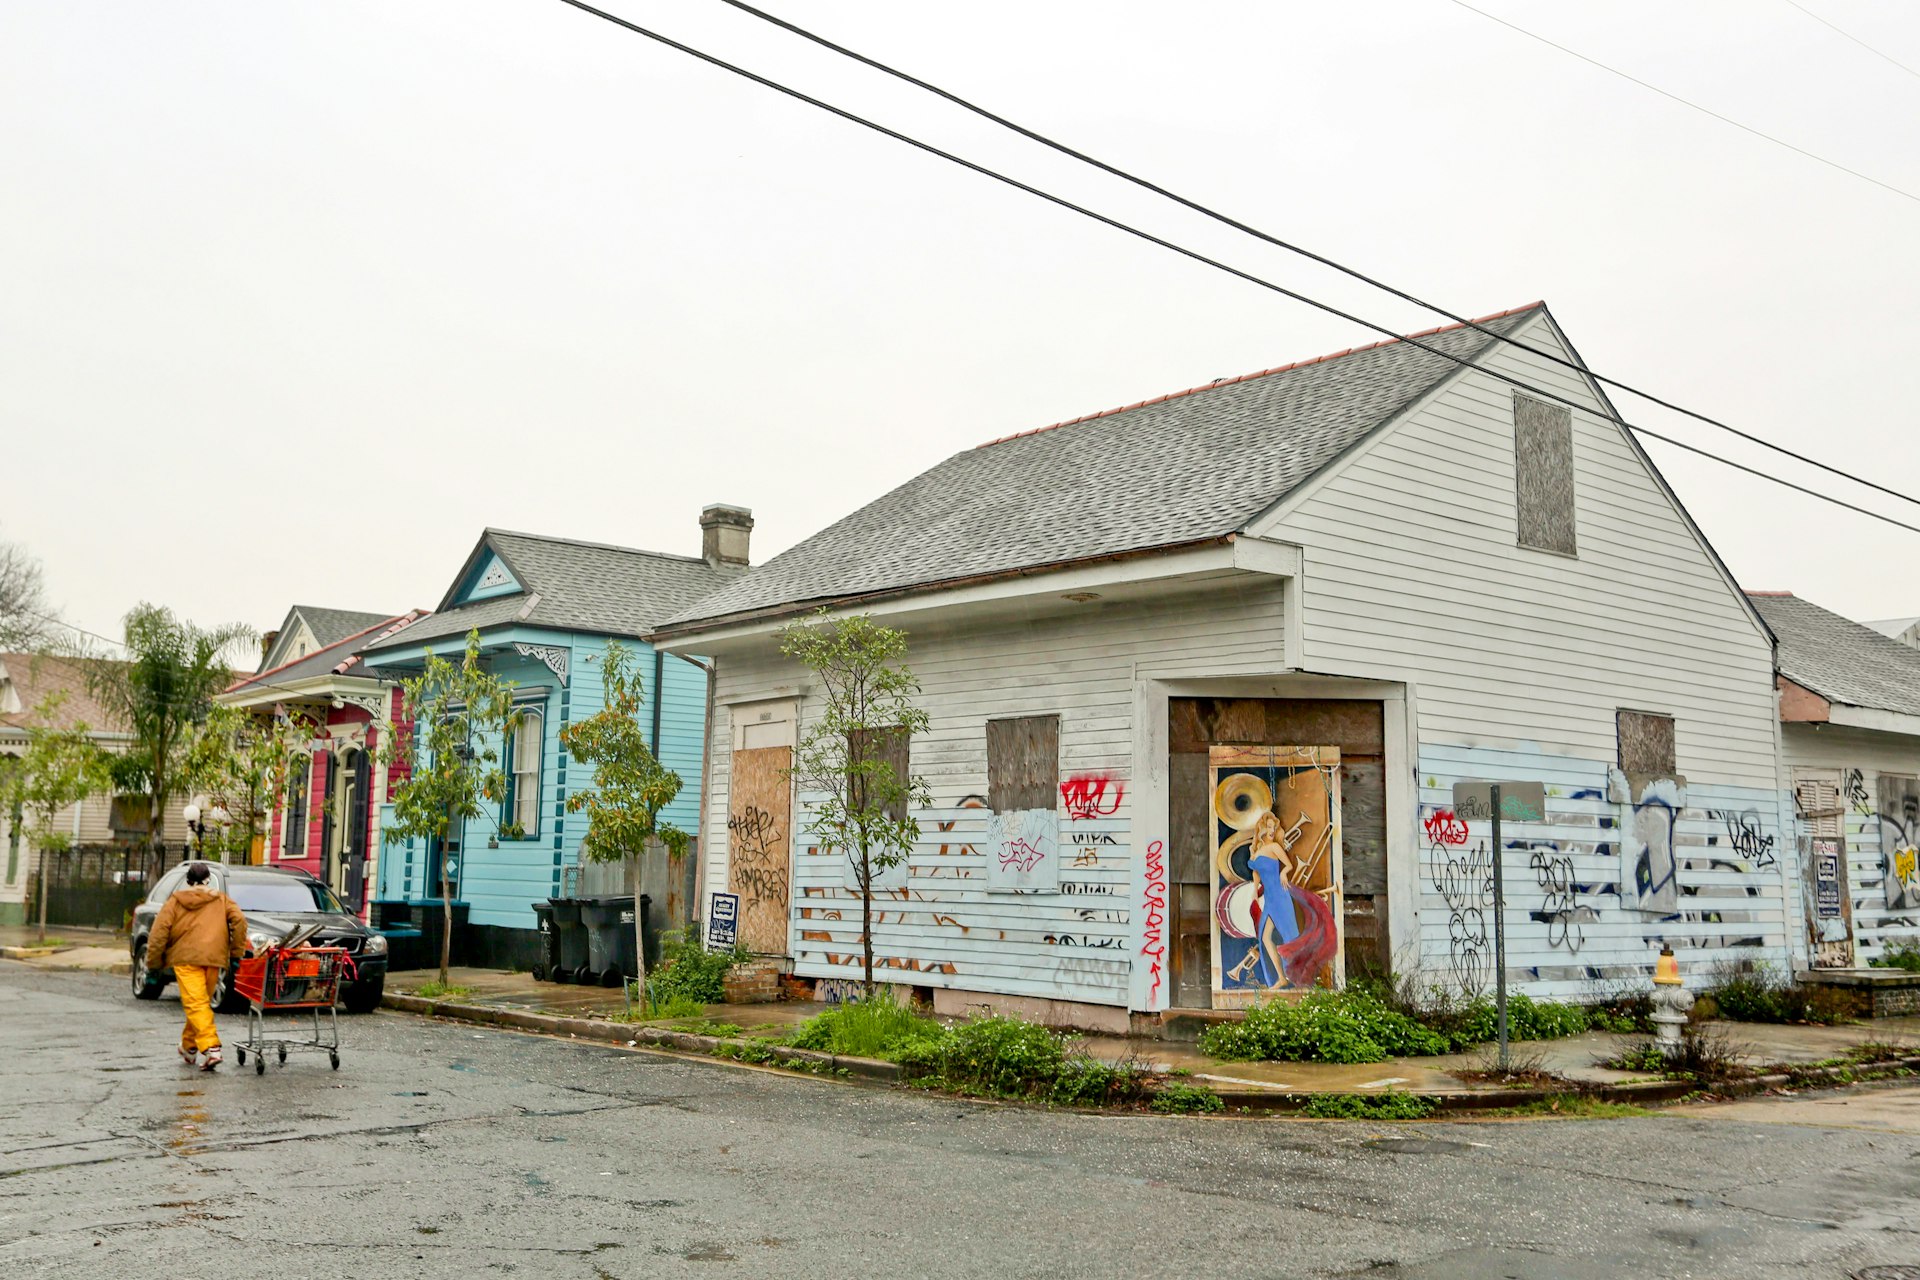 An abandoned, graffiti-covered home stands adjacent to occupied properties in the Bywater neighborhood of New Orleans